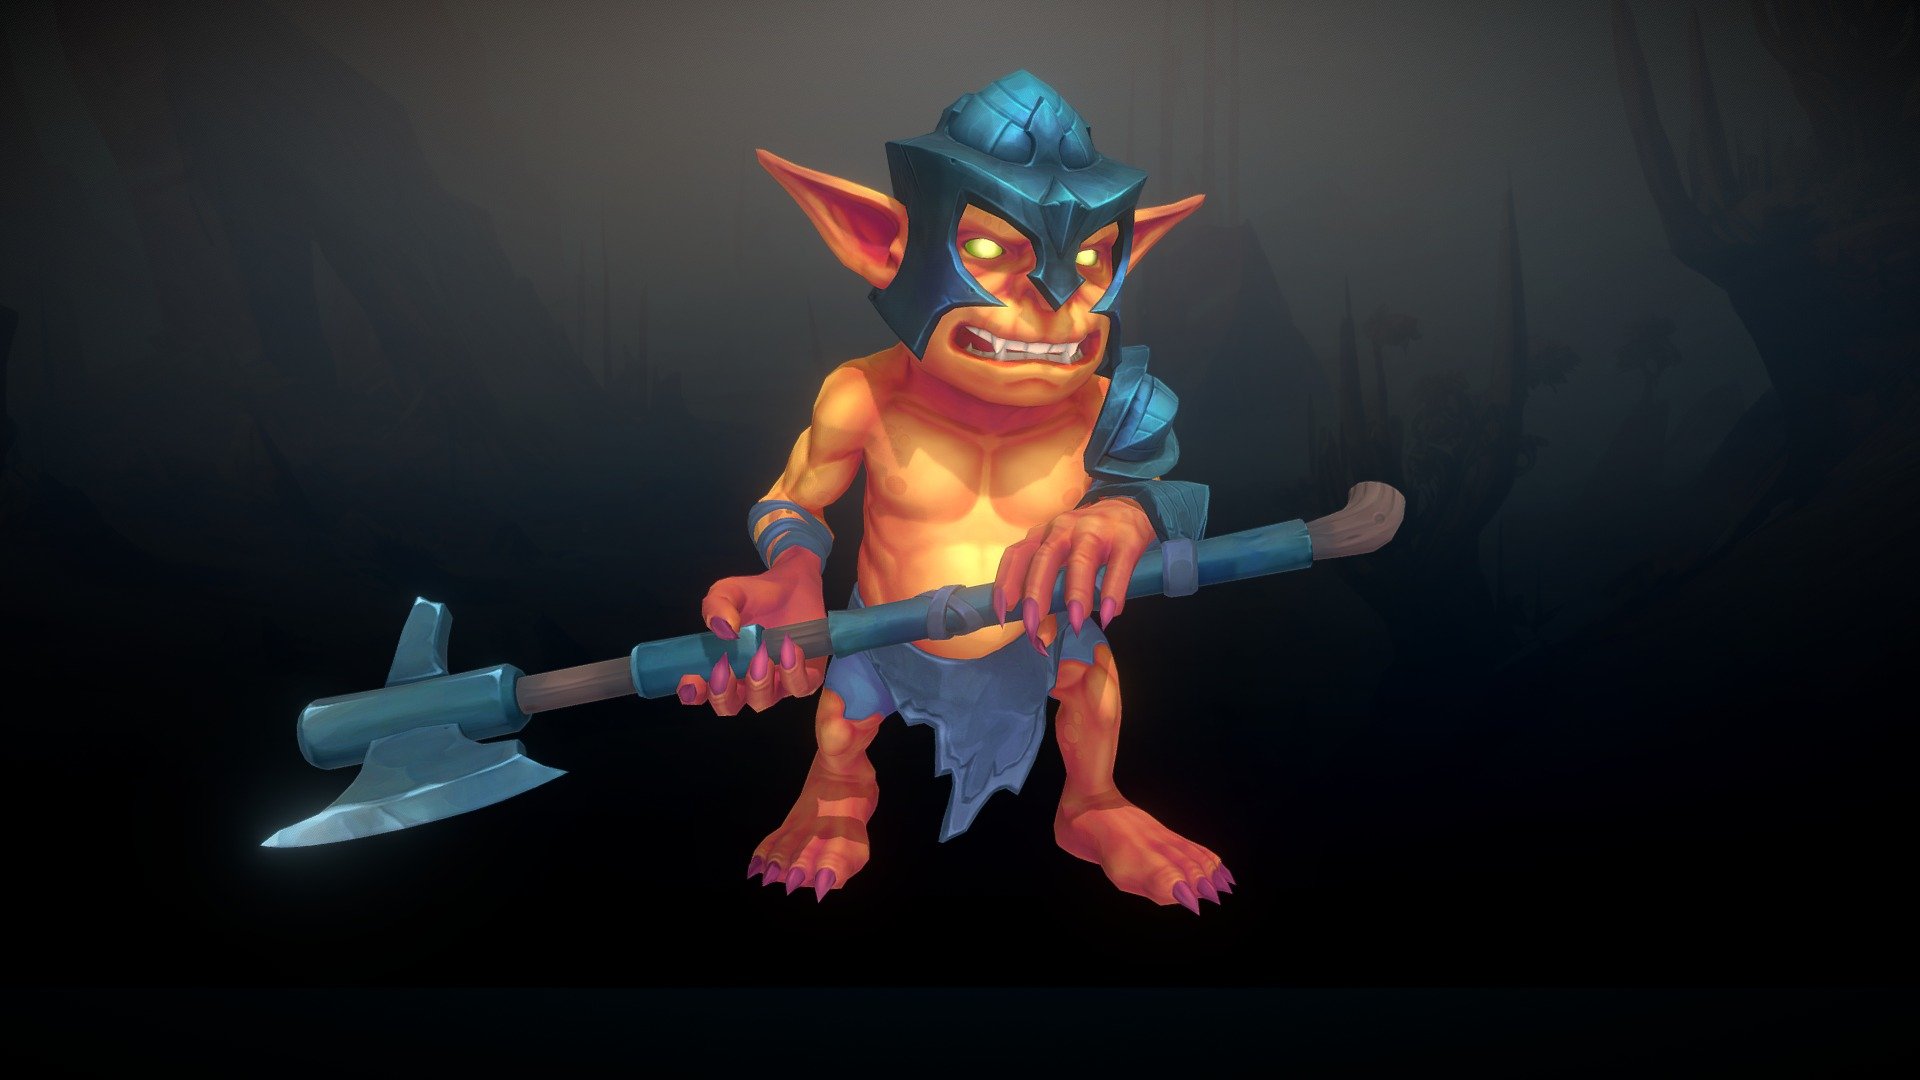 Stylized character for a project.

Software used: Zbrush, Autodesk Maya, Autodesk 3ds Max, Substance Painter - Stylized Fantasy Gremlin Warrior - 3D model by N-hance Studio (@Malice6731) 3d model